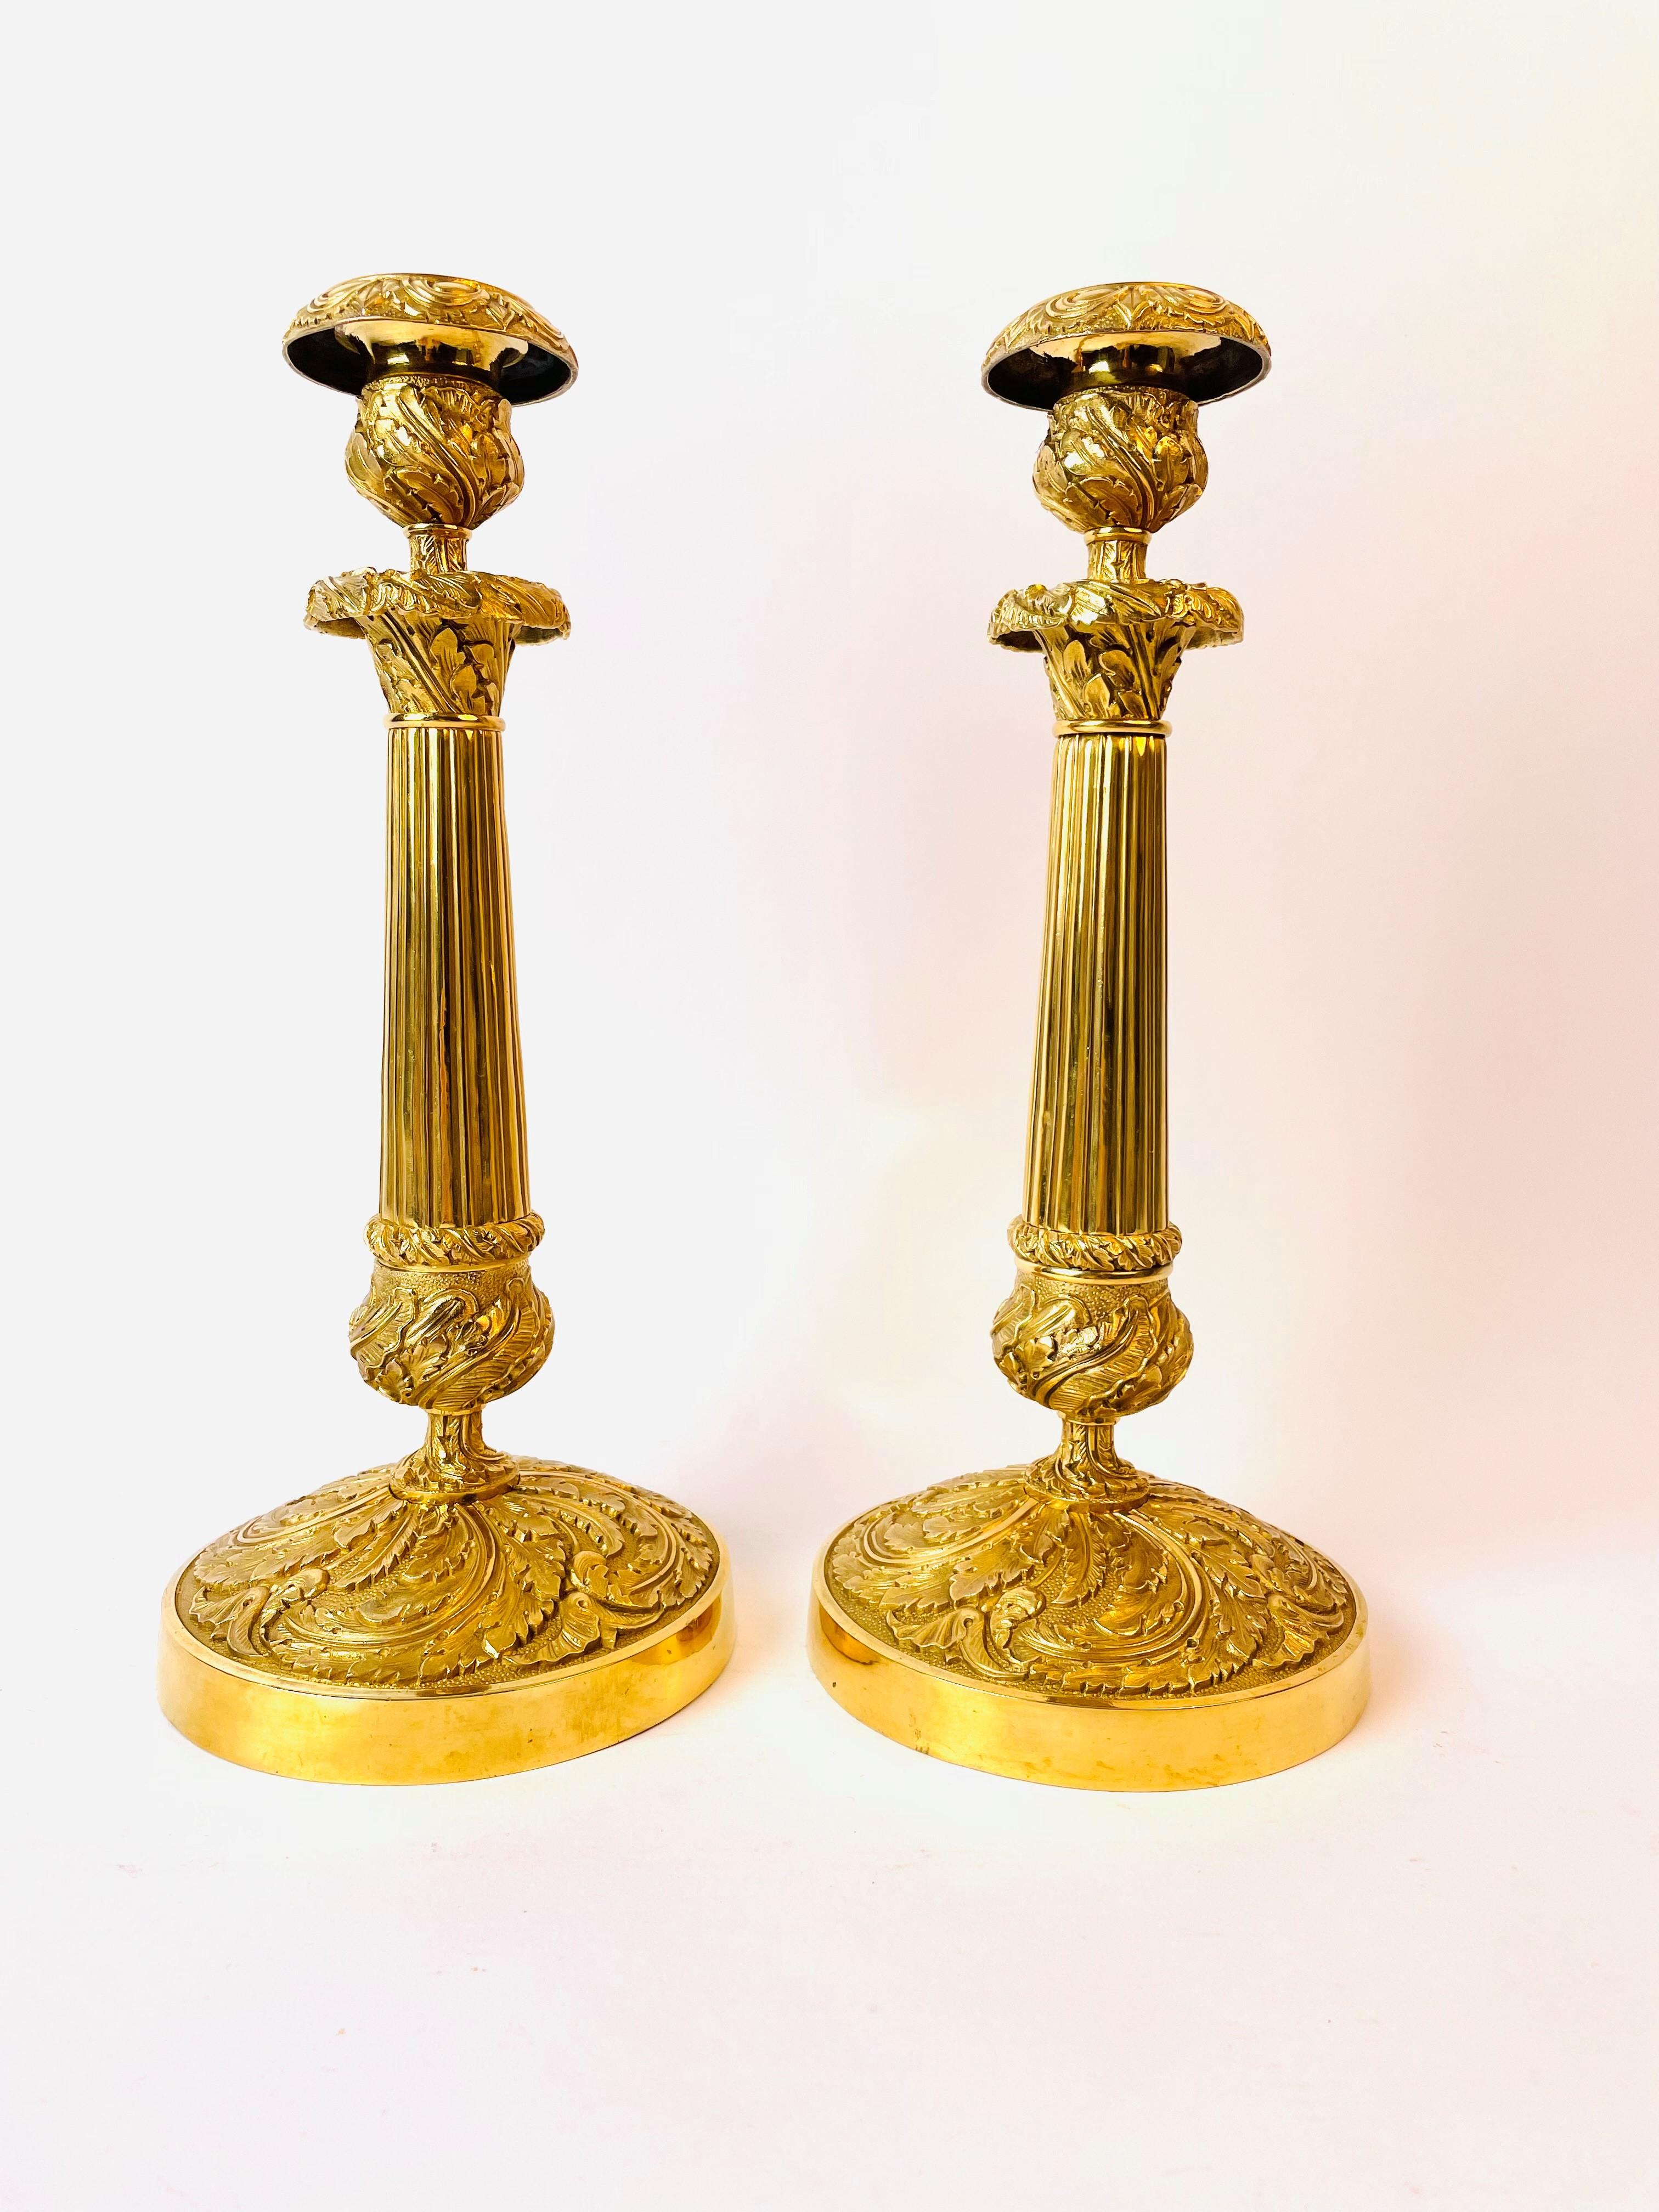 A large and excellent pair of gilt bronze candlesticks in French Empire, circa 1820. Very decorative with the twisted base and with a wonderful gilding.

Wear consistent with age and use.
   